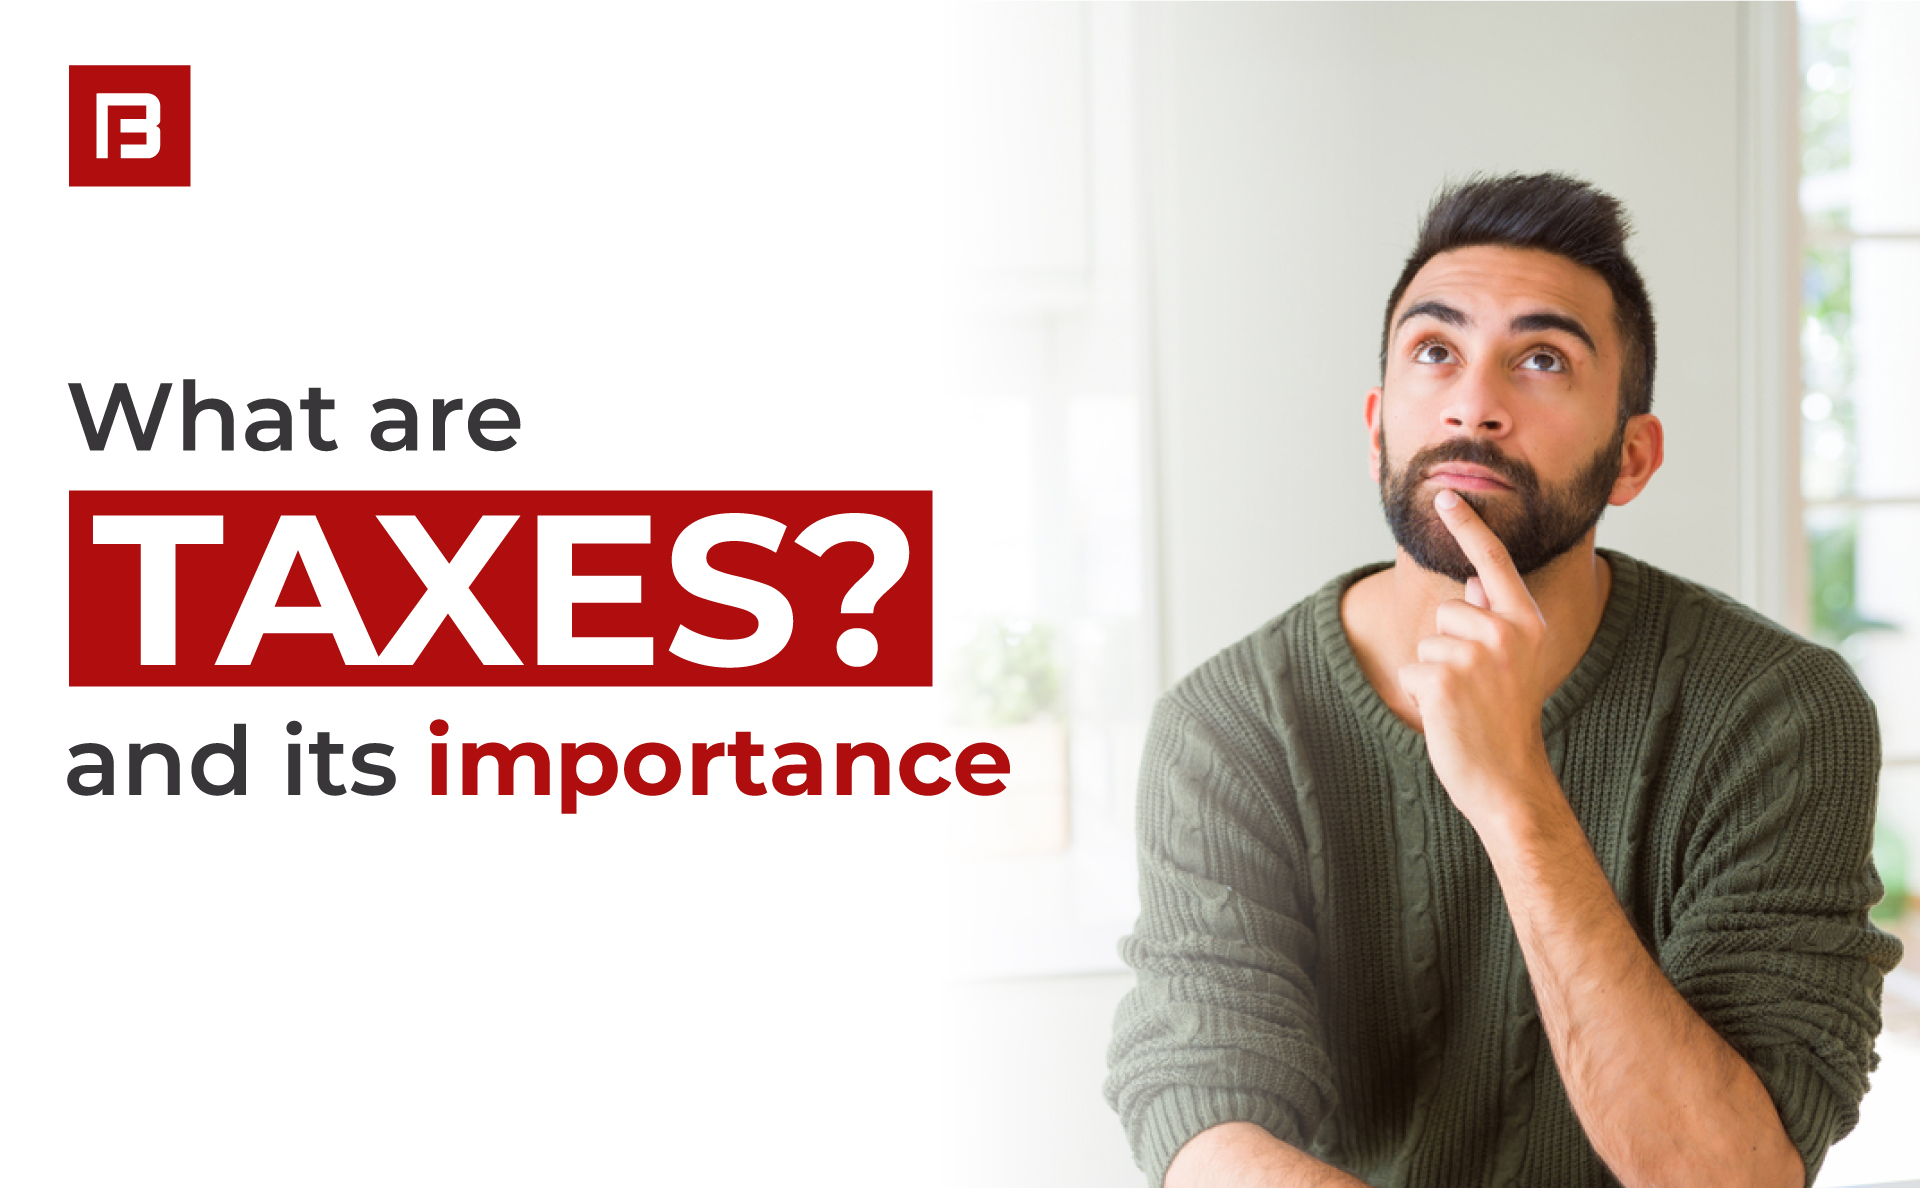 What is meant by tax and how important is it?